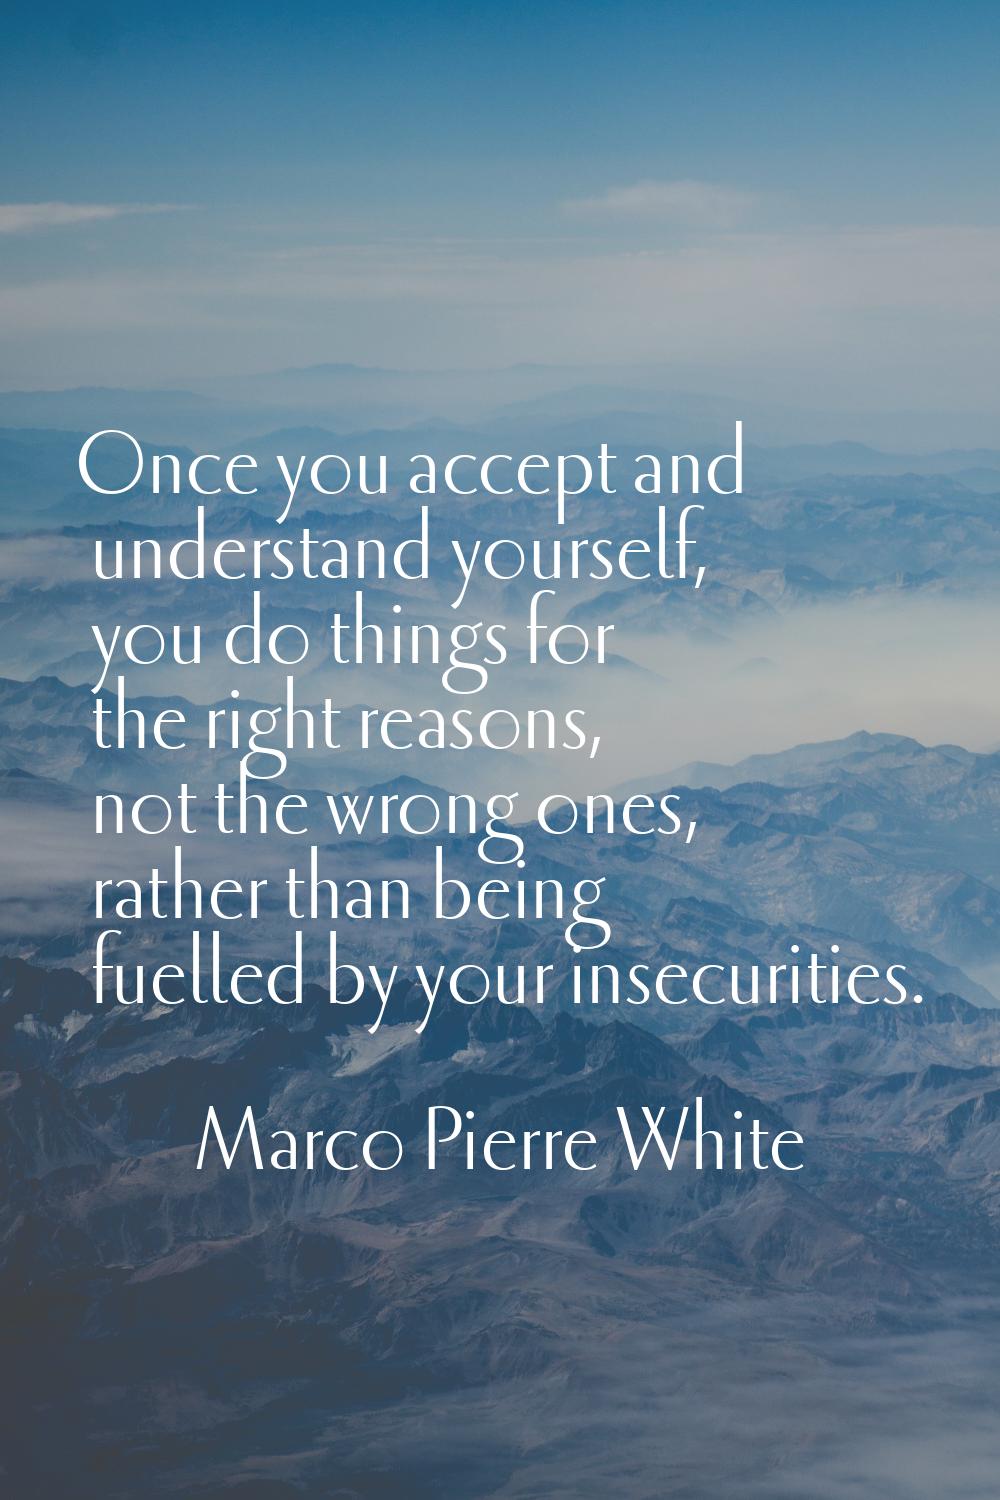 Once you accept and understand yourself, you do things for the right reasons, not the wrong ones, r